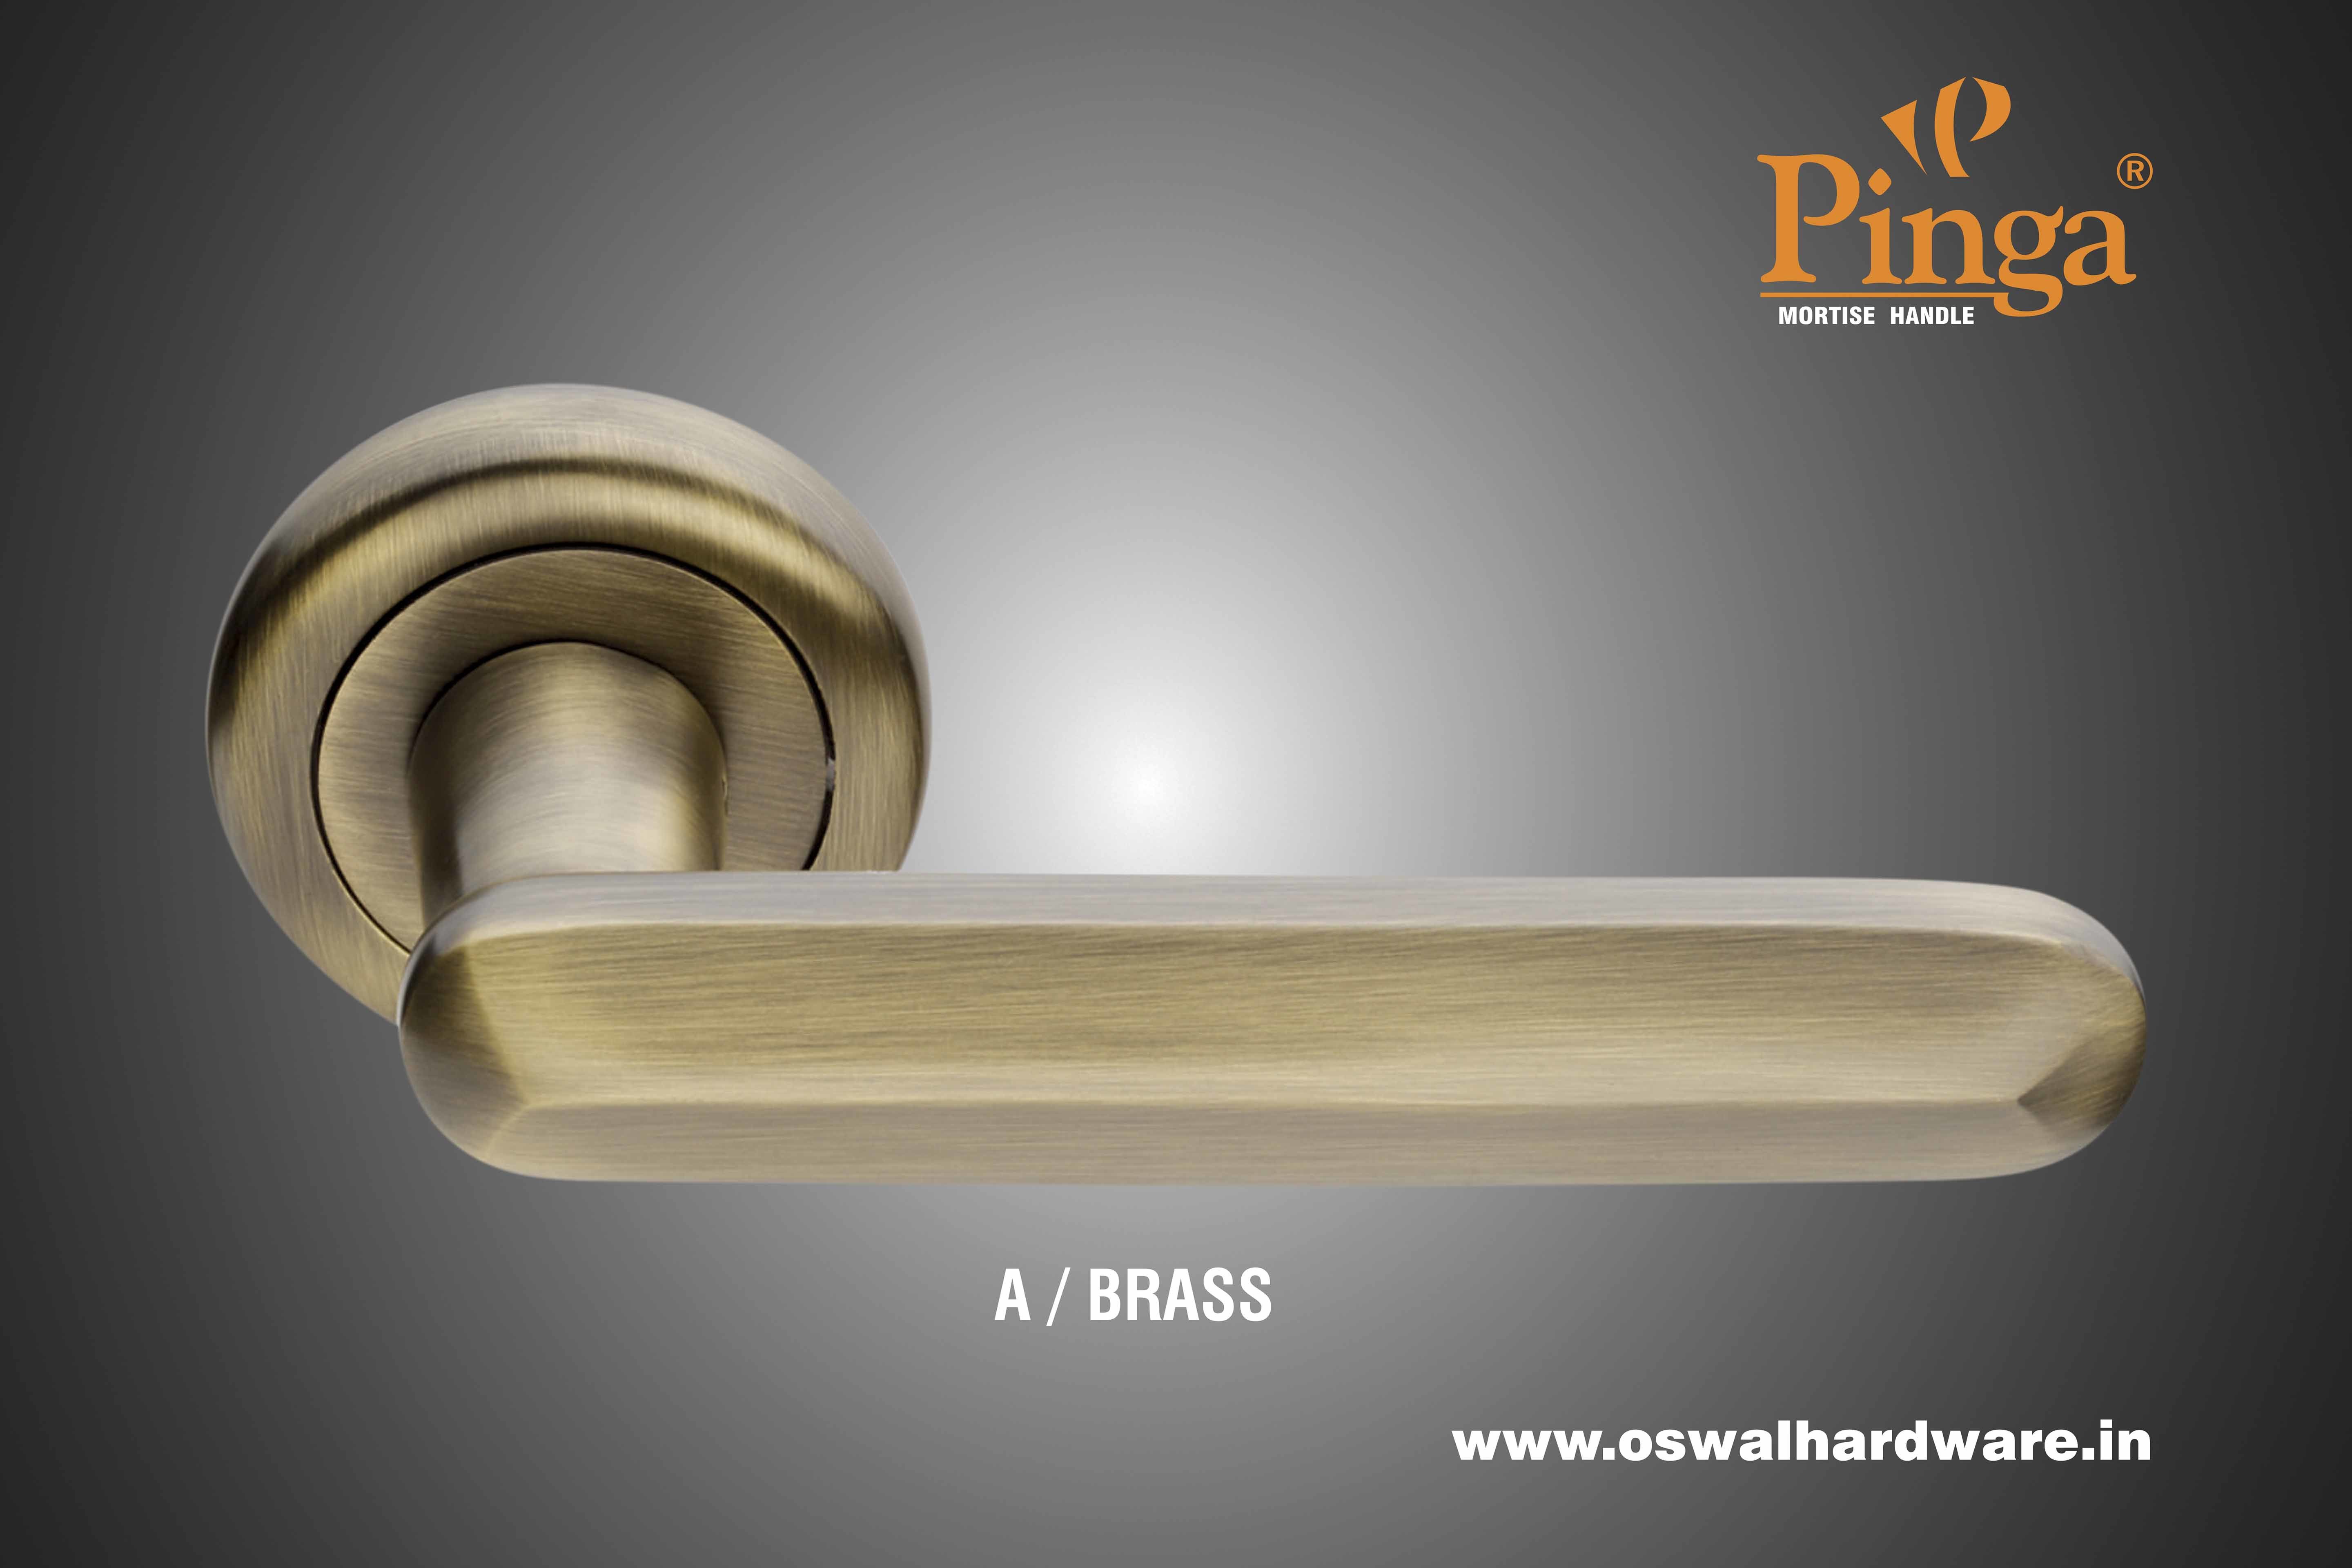 Mortise Handle Brass 2019